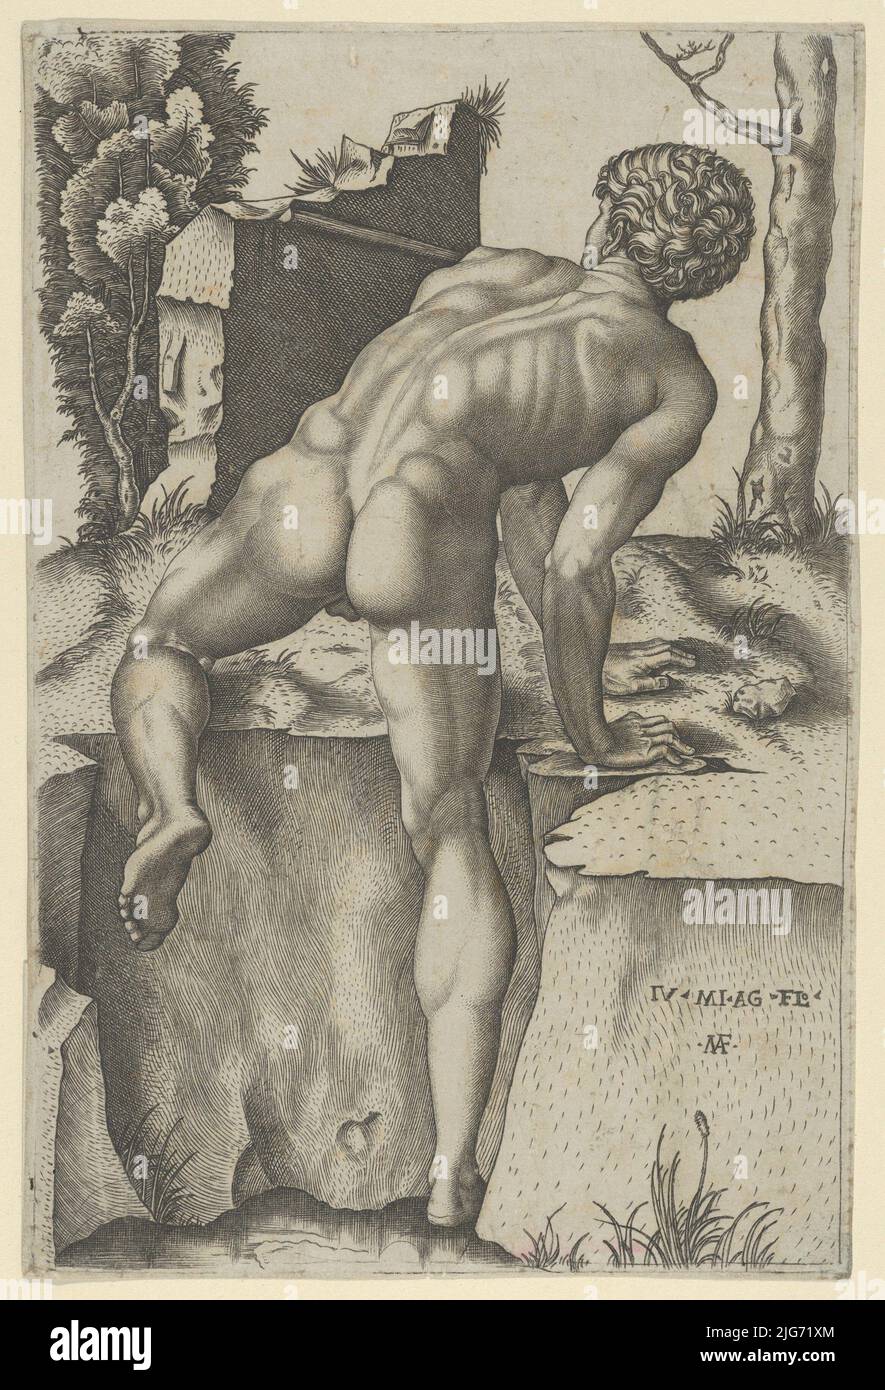 Naked man viewed from behind climbing a river bank, after Michelangelo, ca. 1509. Stock Photo